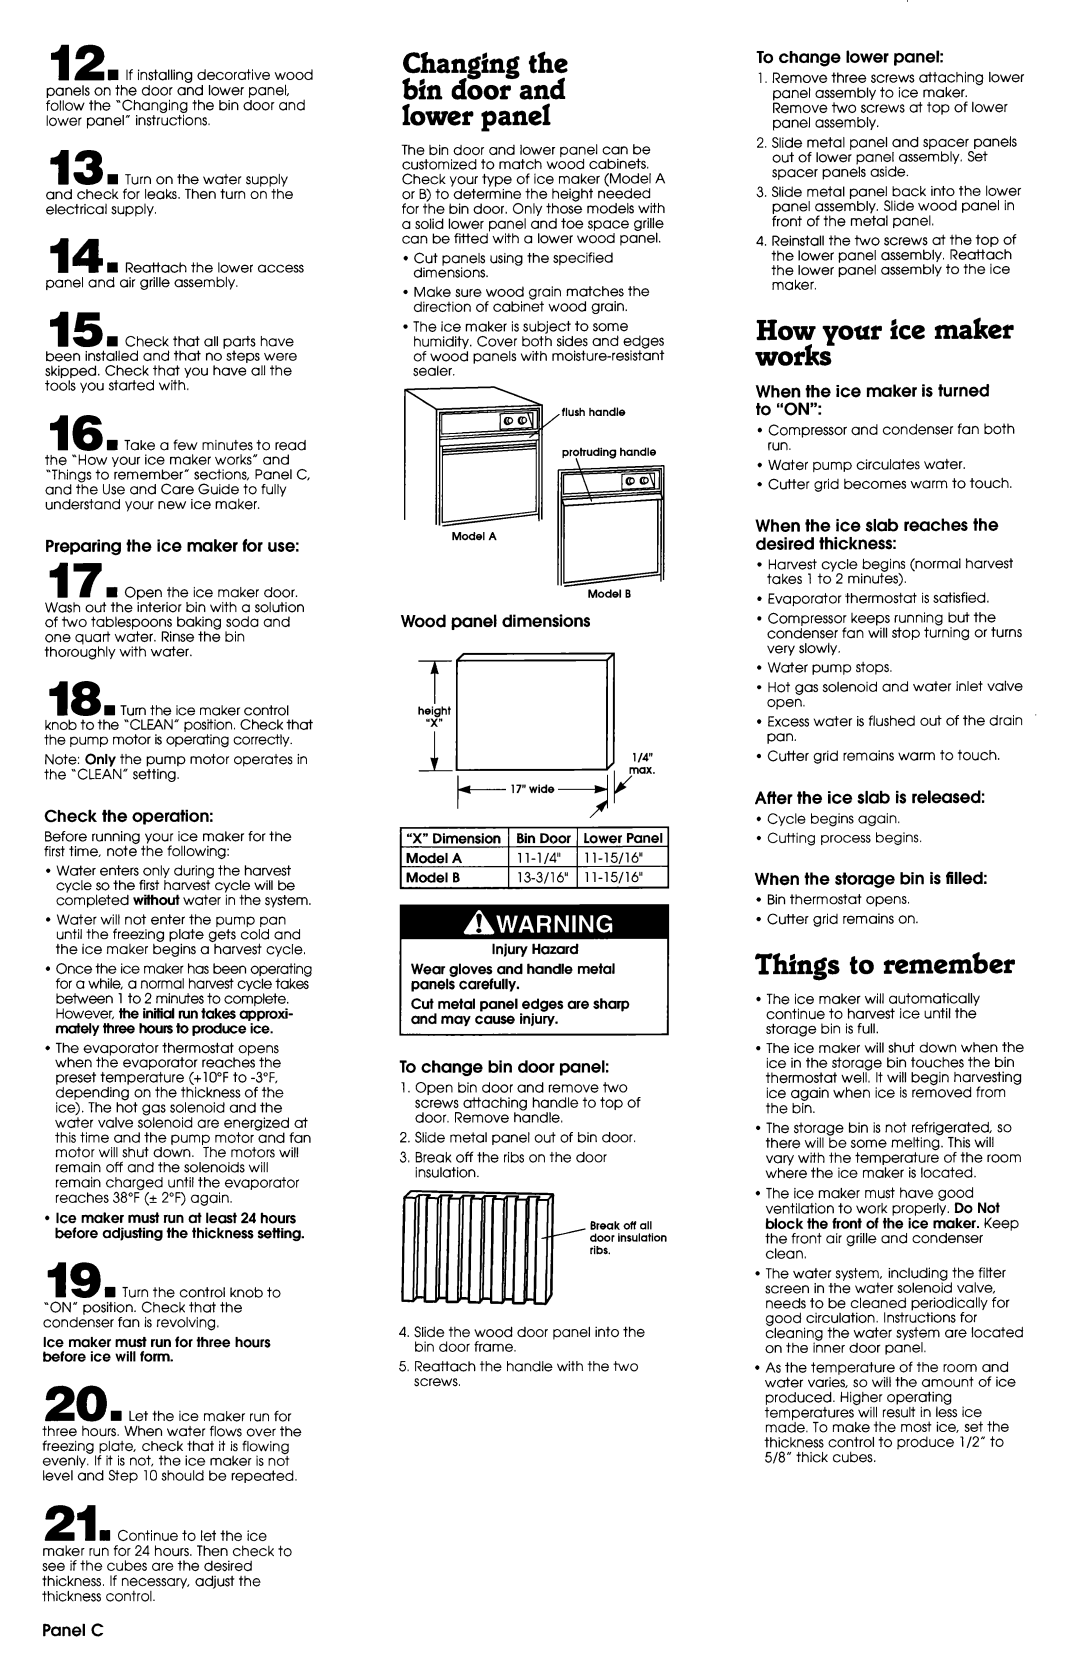 Whirlpool 2180911 How your ice maker works, Things to remember, Changing the bin door and lower panel 